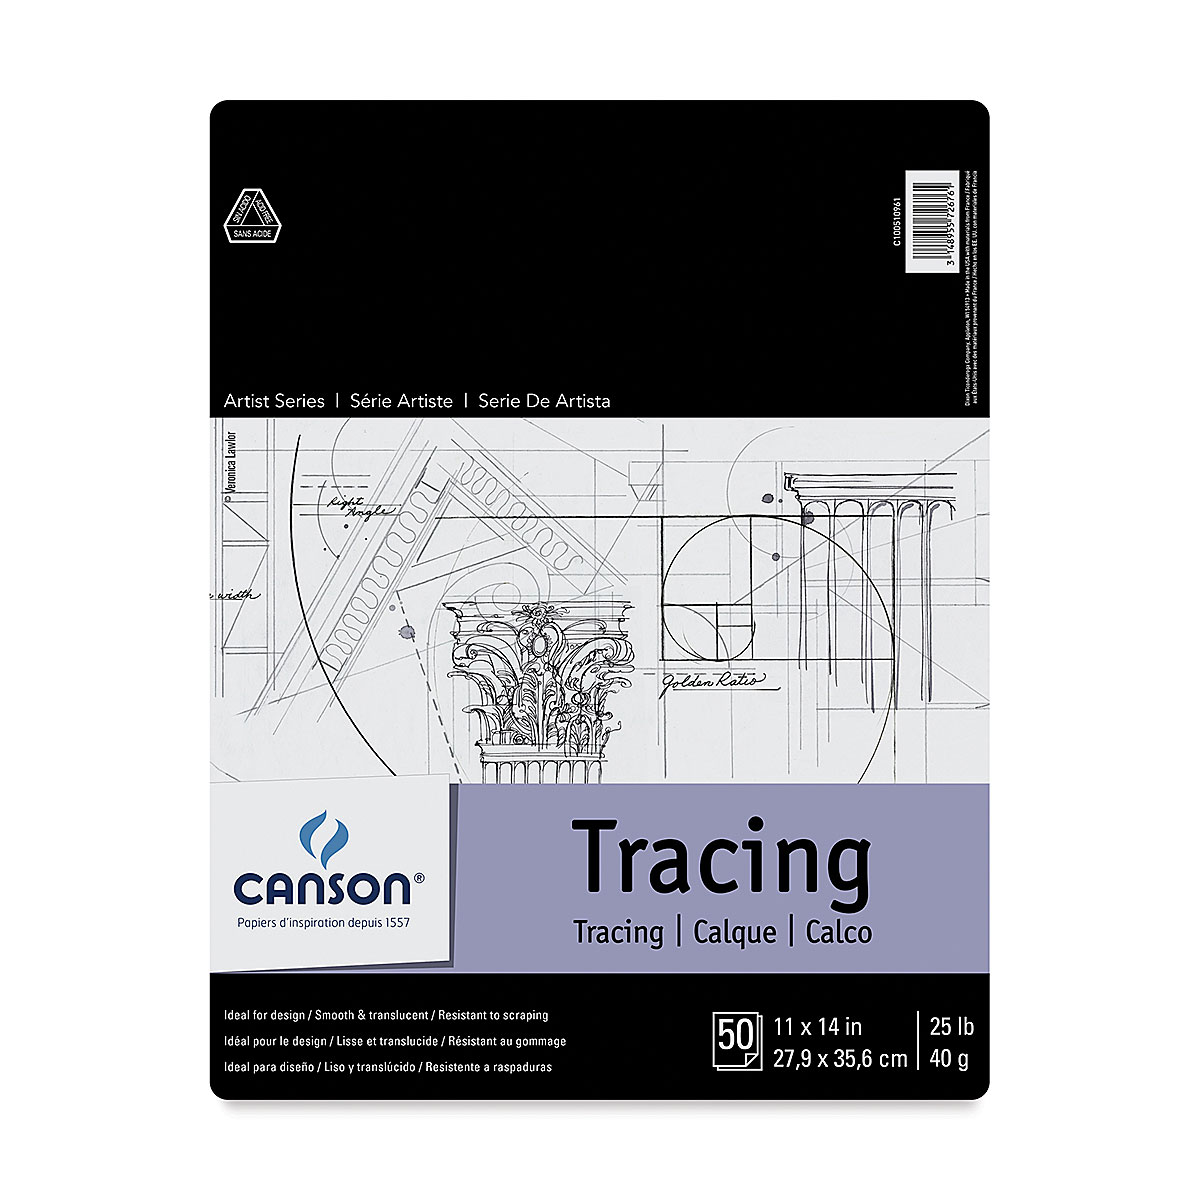 25 Pound Canson Foundation Series Tracing Paper Roll for Craftwork 36 Inch x 10 Yard Roll